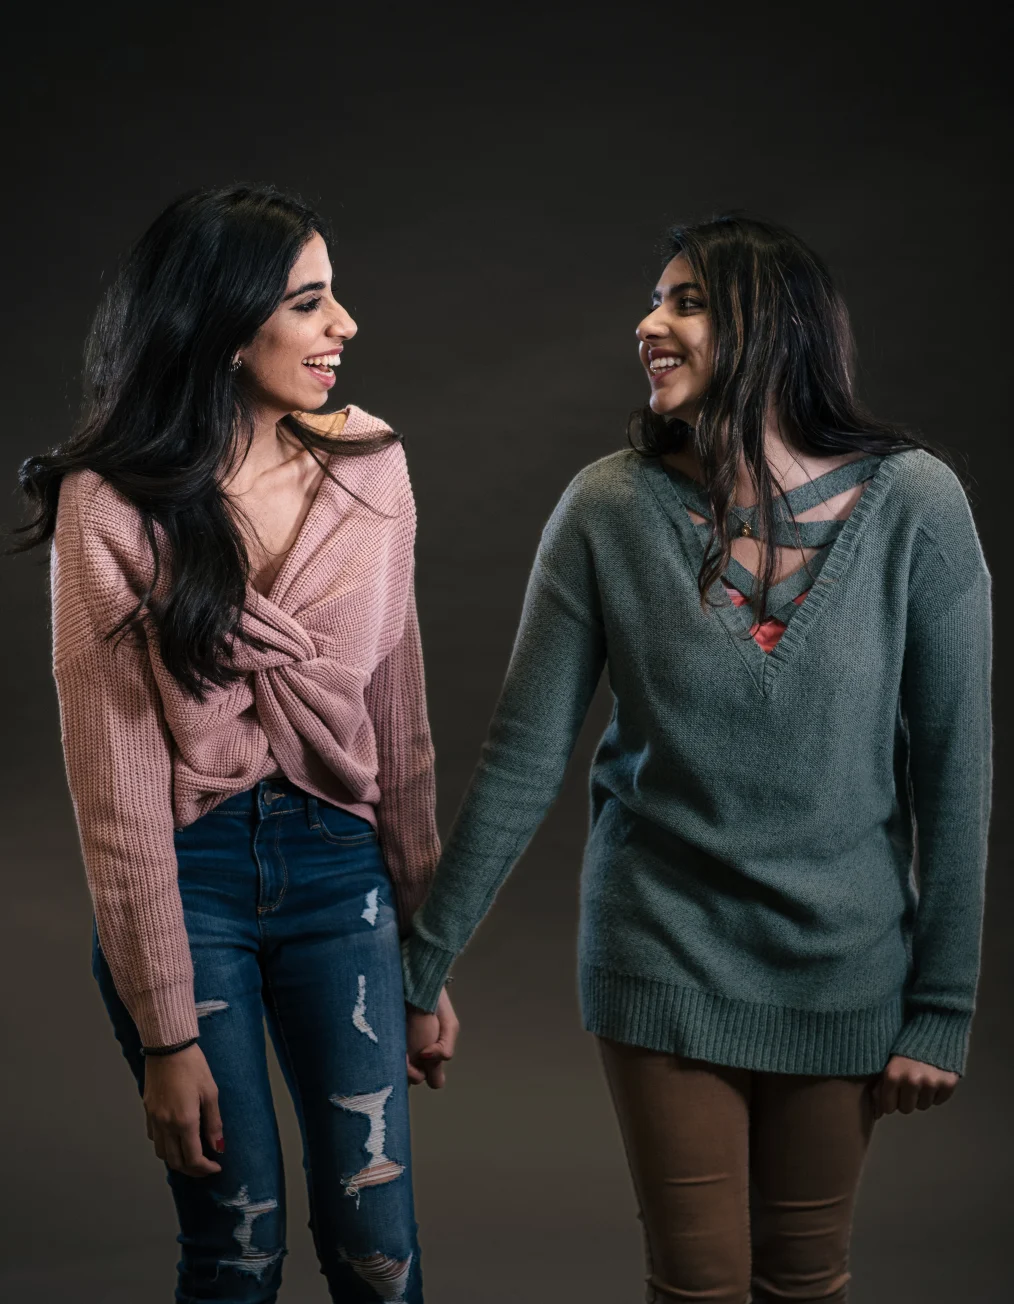 Two women with light-medium skin tones and long black hair hold hands while
smiling at each other in front of a black backsplash.